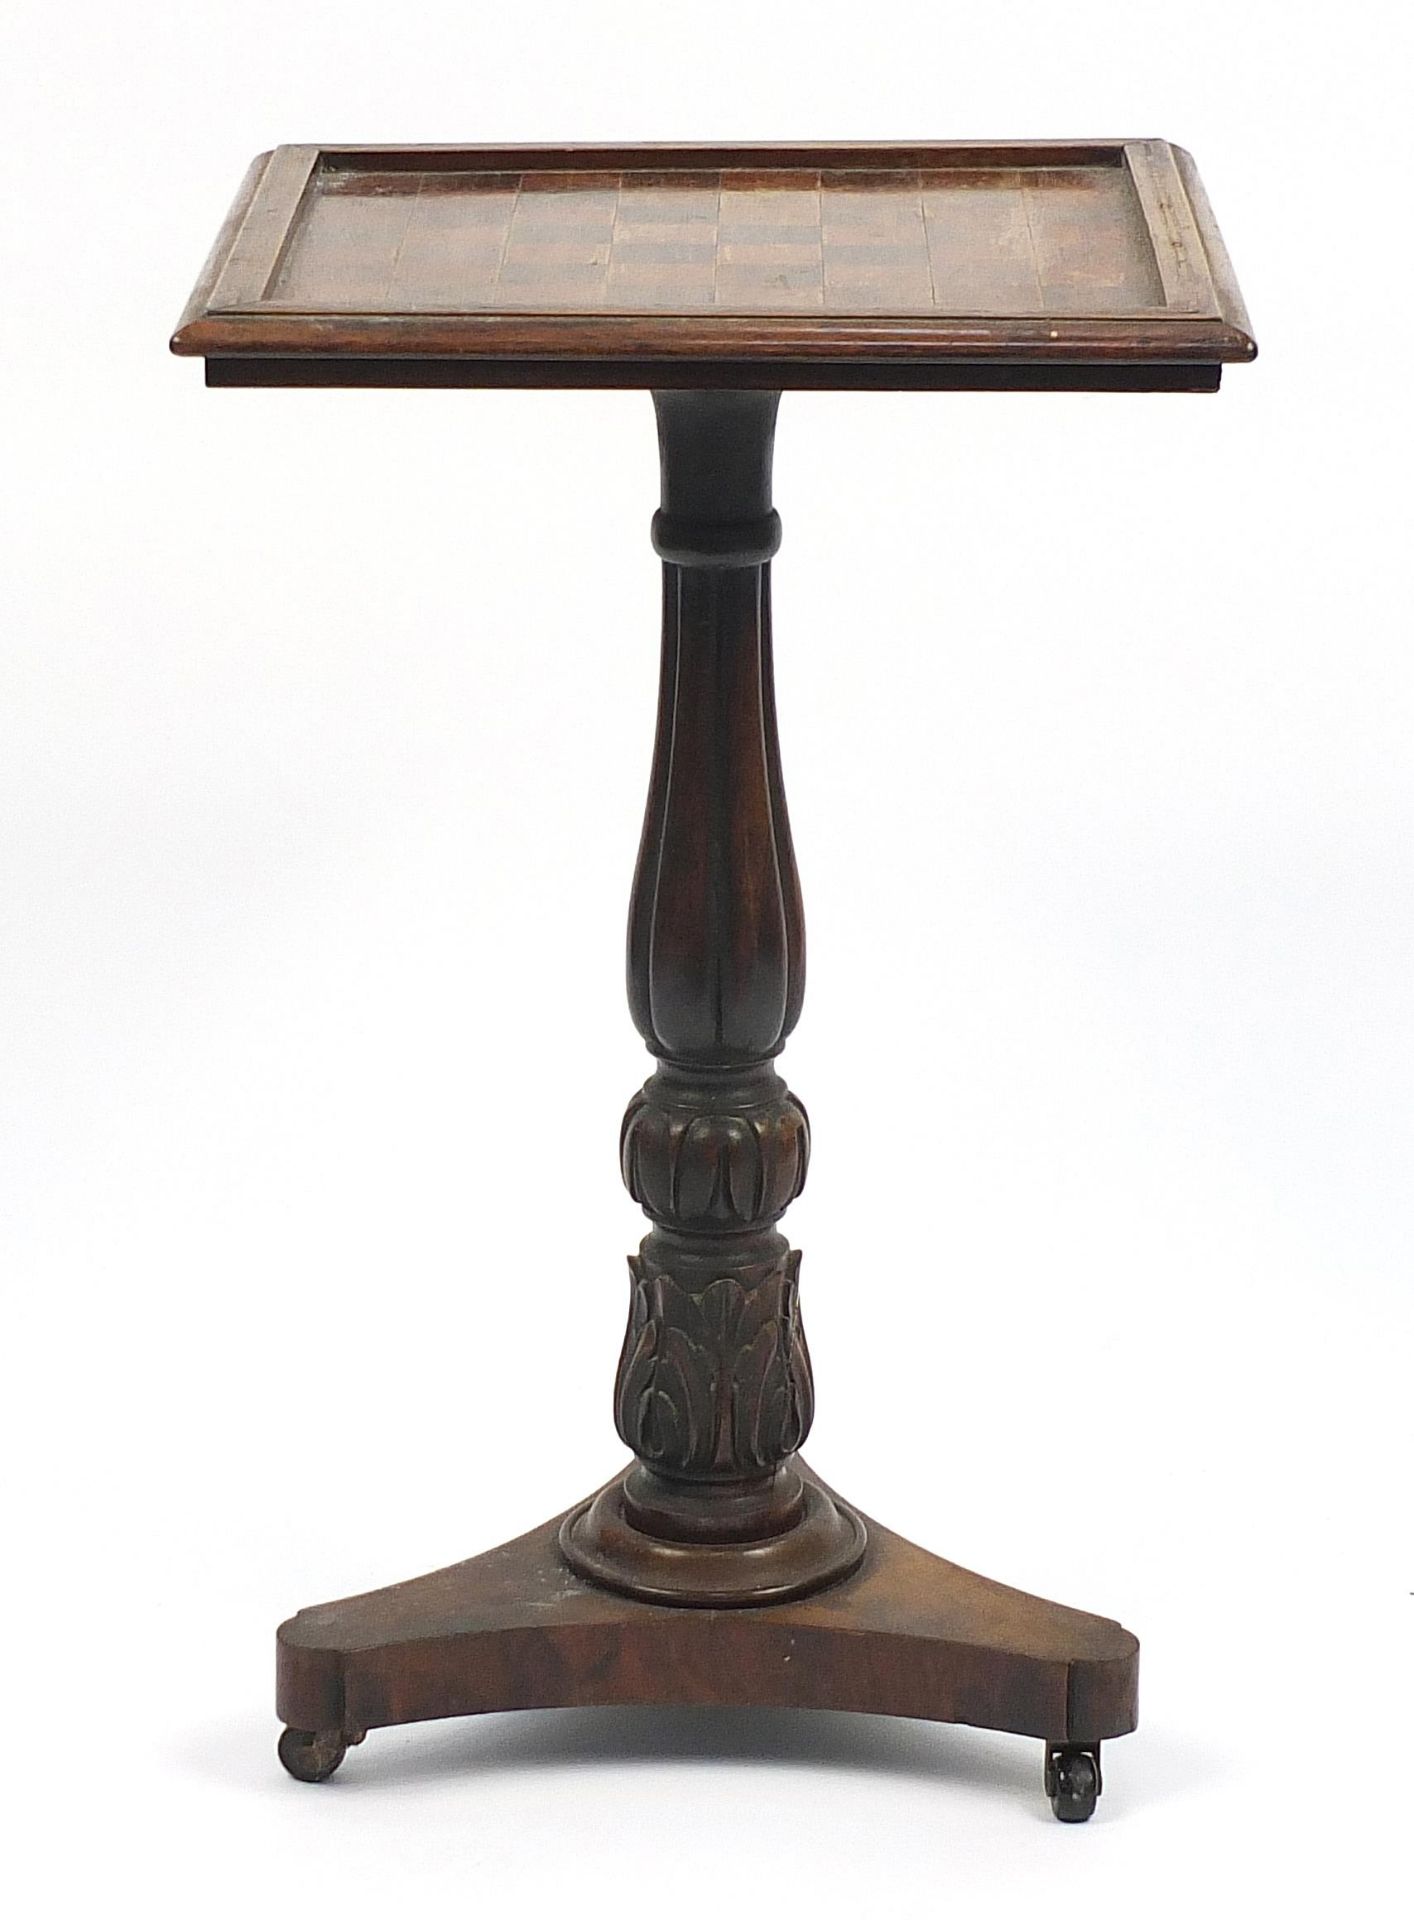 19th century rosewood chess table with carved column, 74cm H x 47cm W x 47cm D